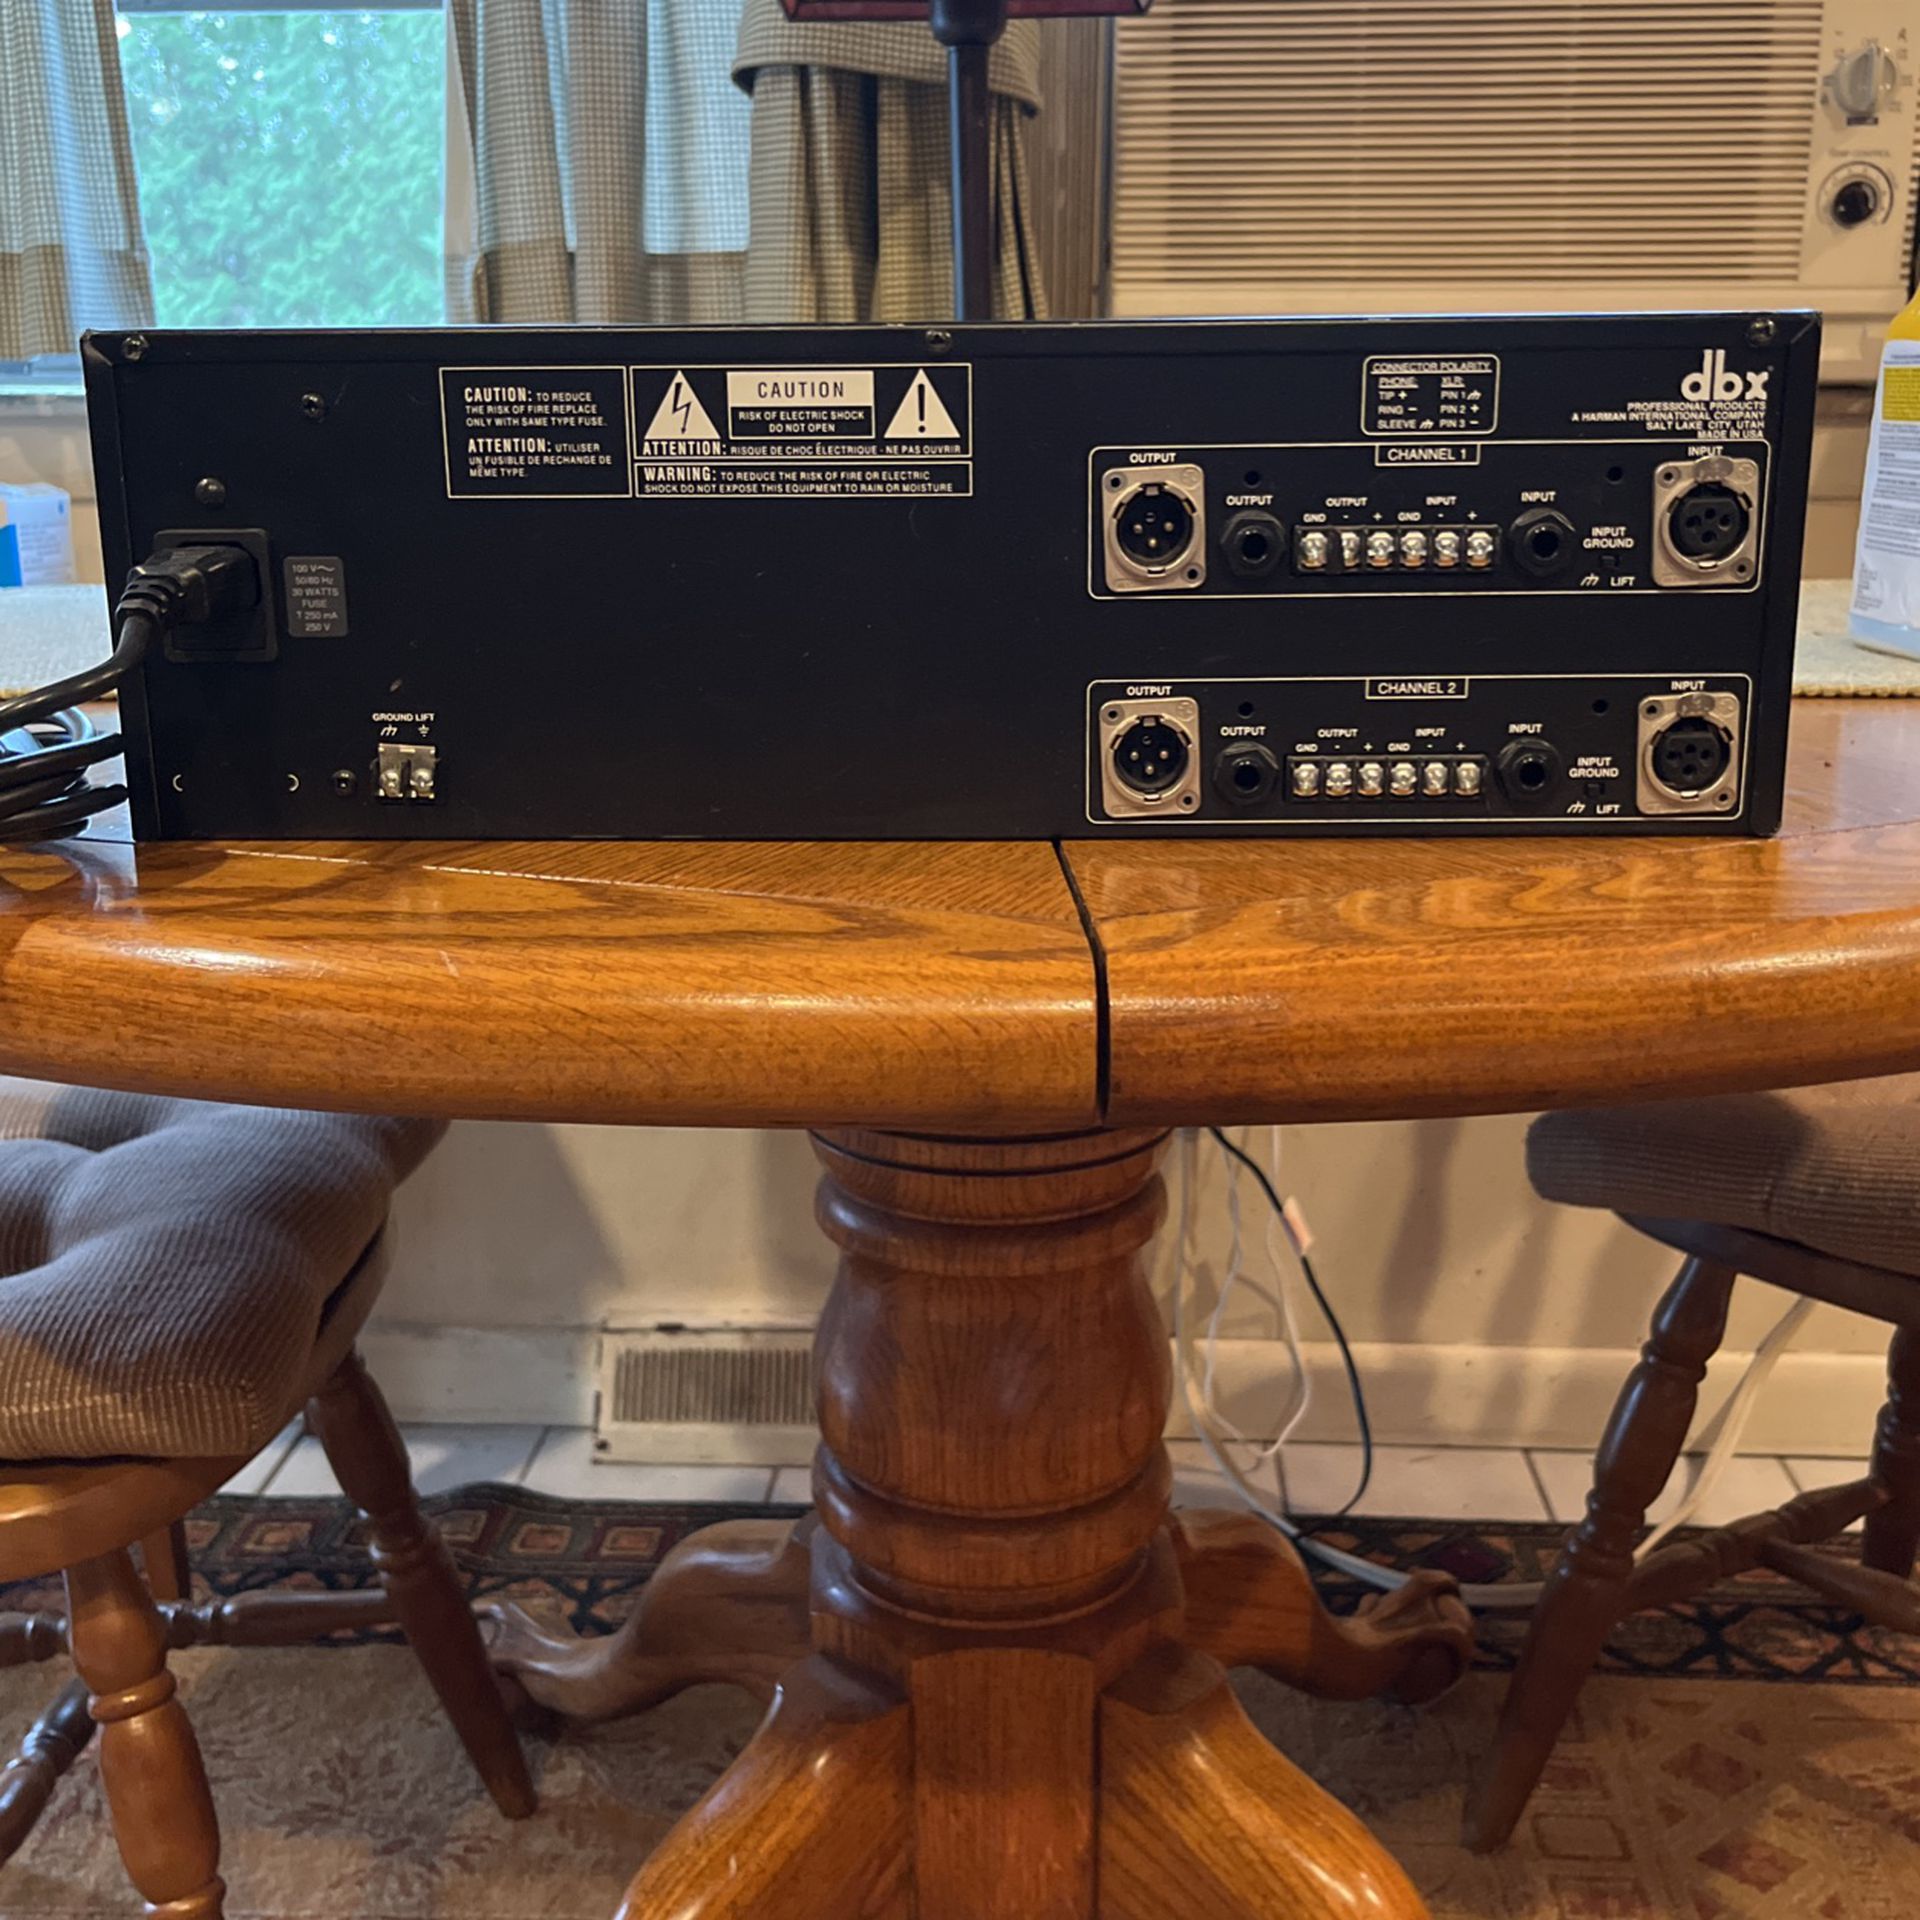 DBX 3231L Dual 1/3 Octave Graphic EQ for Sale in East Hartford, CT - OfferUp